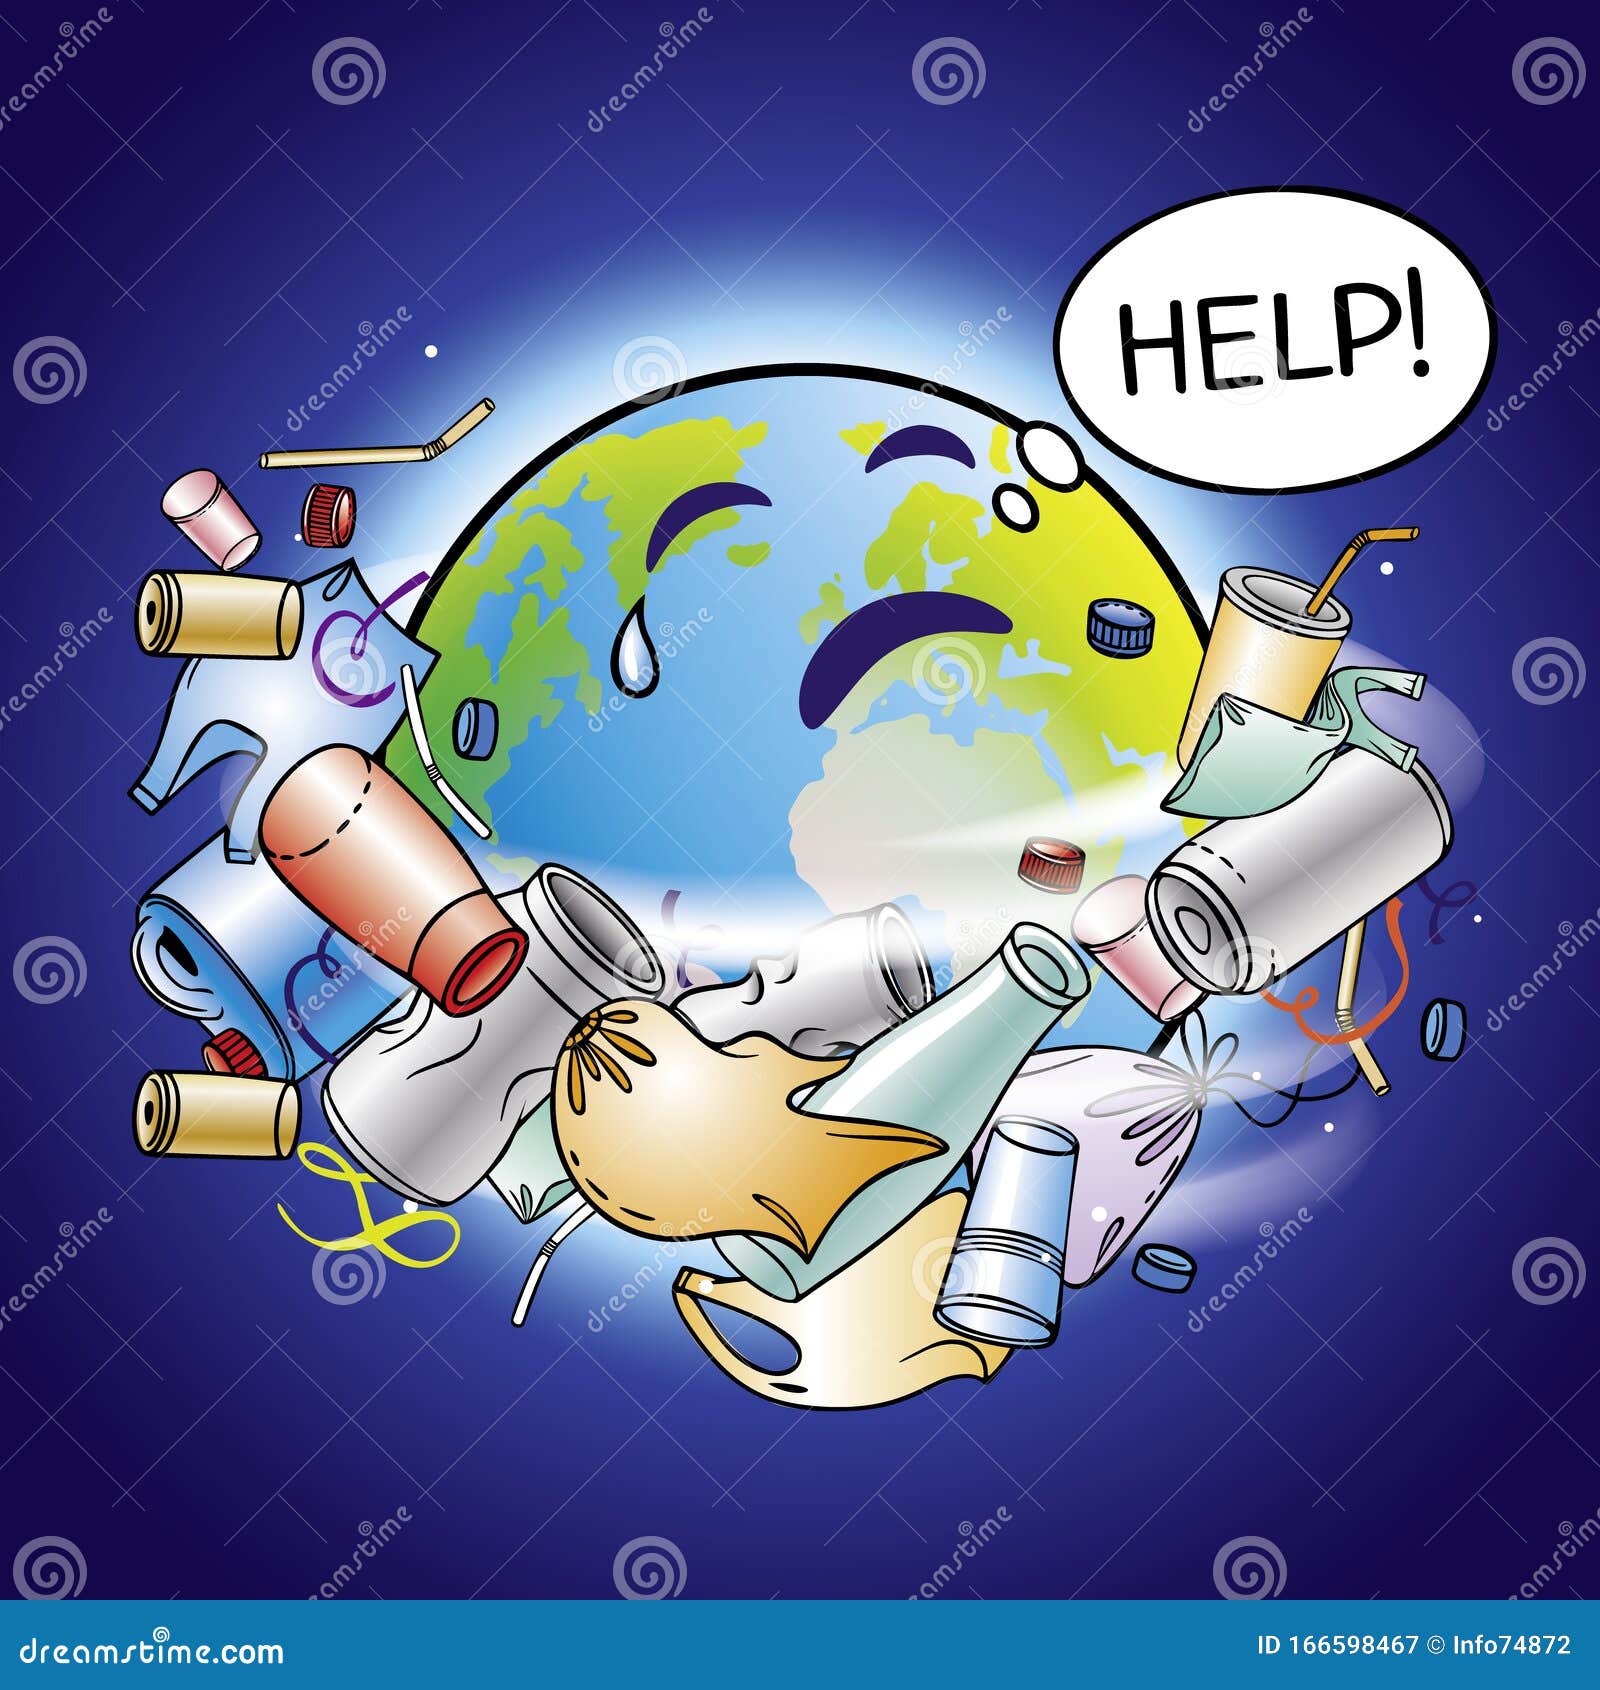 The Problem of Pollution of the Planet. Space Debris. the Garbage, Plastic,  Bags on the Planet Stock Illustration - Illustration of toxic, plastic:  166598467